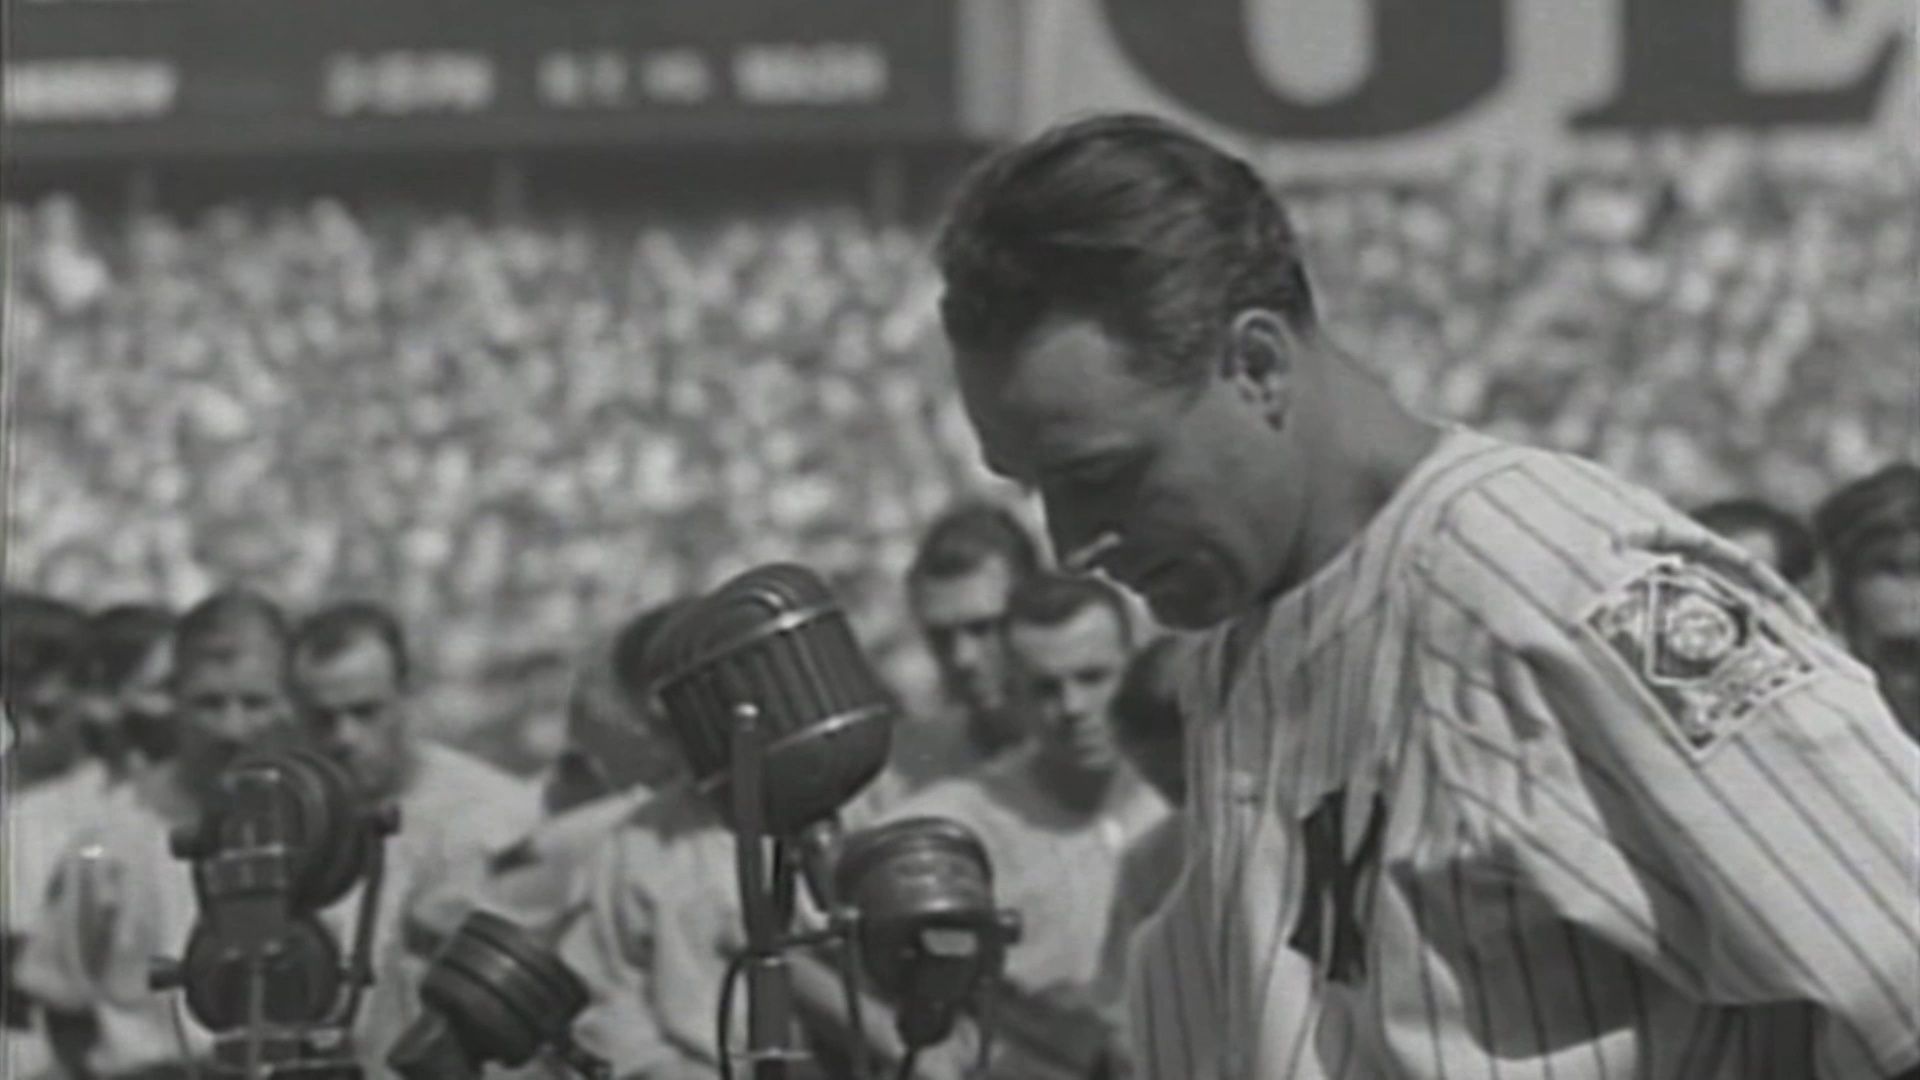 Lou Gehrig's final years